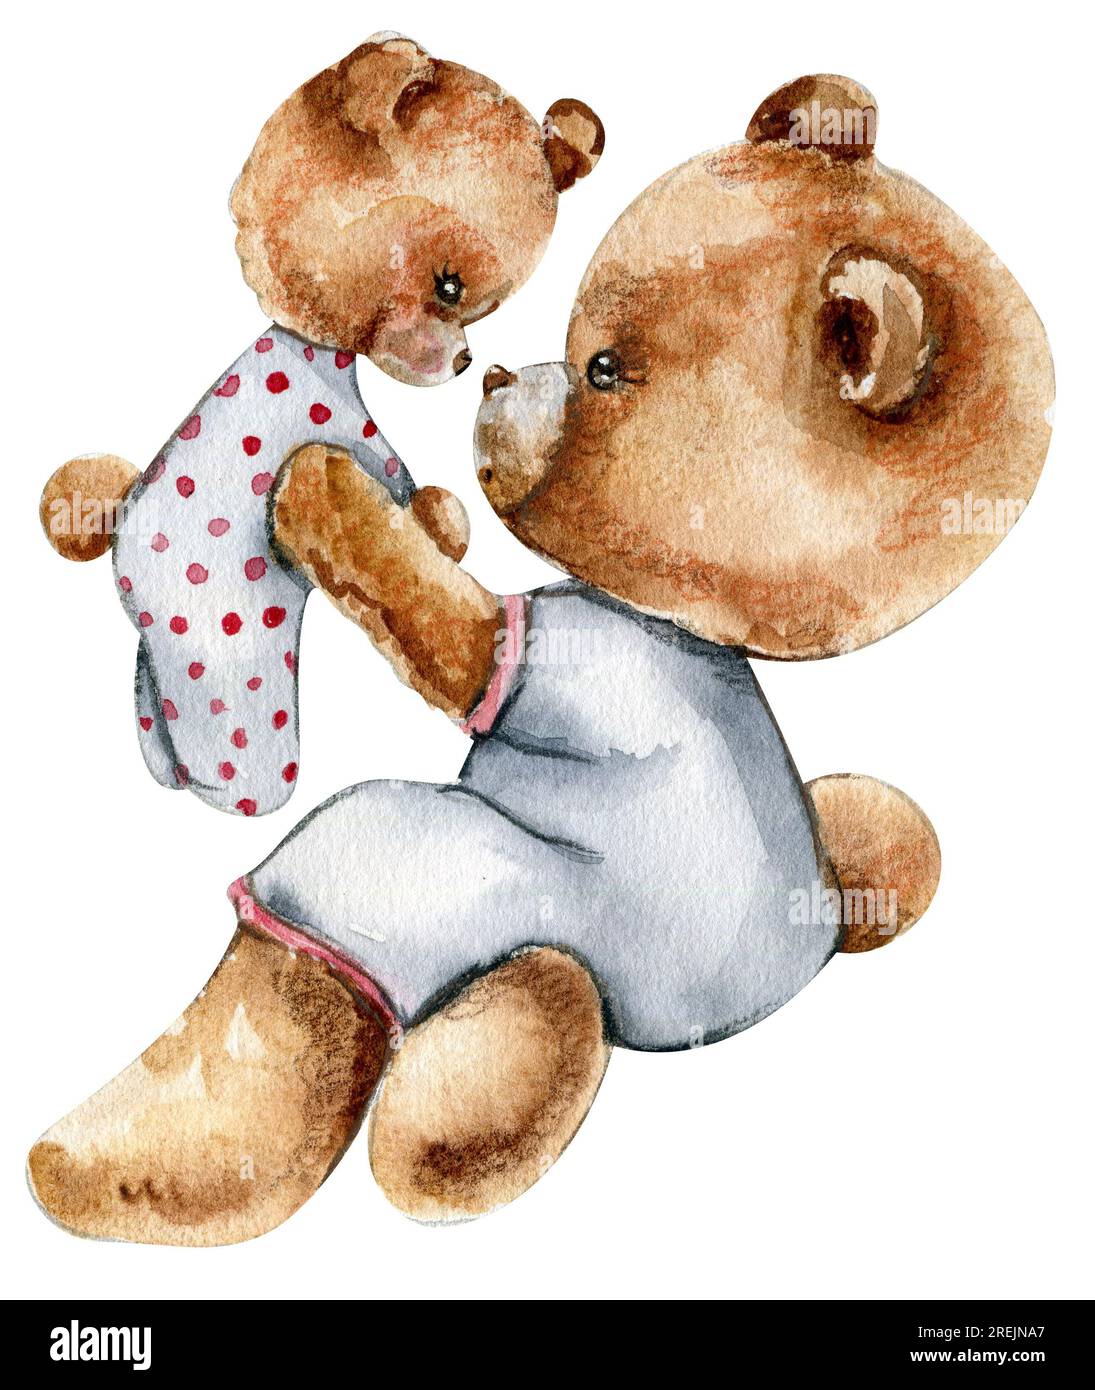 Teddy bear and in pijama with toy. Design for baby shower party, birthday, cake, holiday design, greetings card, invitation. Stock Photo